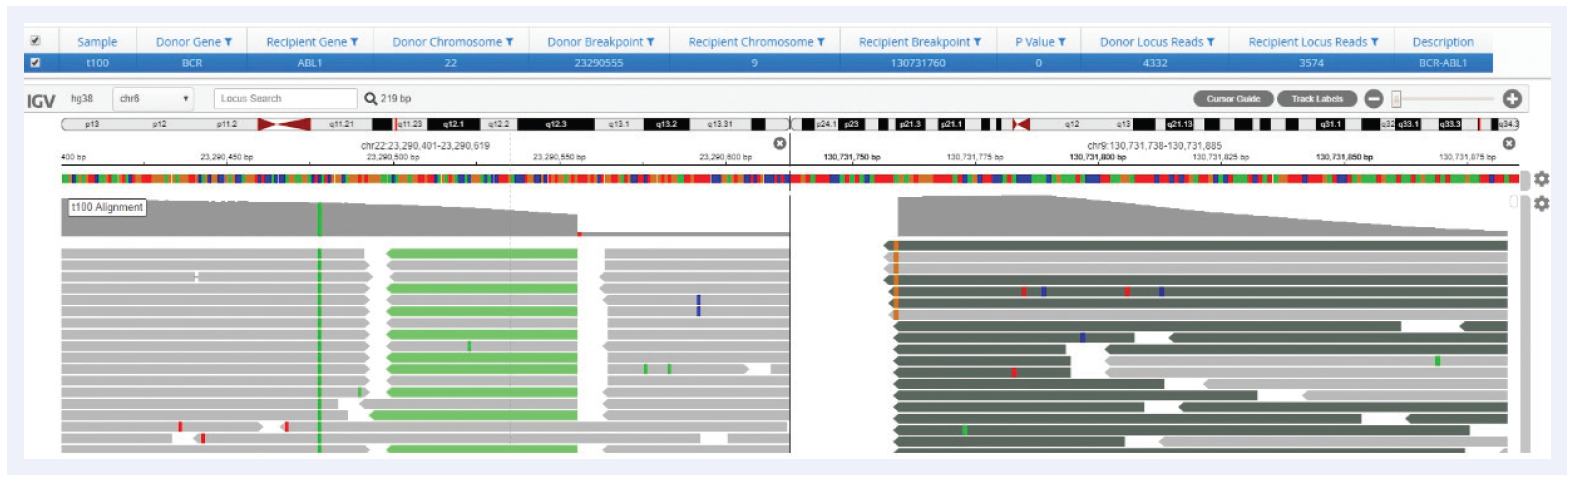 Figure 9: BCR-ABL translocation. Split-reads covering both BCR (left panel) and ABL1 (right panel) are detected, indicative of the BCR-ABL gene fusion. Interpret agnostically detects split-reads across the genome, enabling detection of both known and unknown translocation partners.